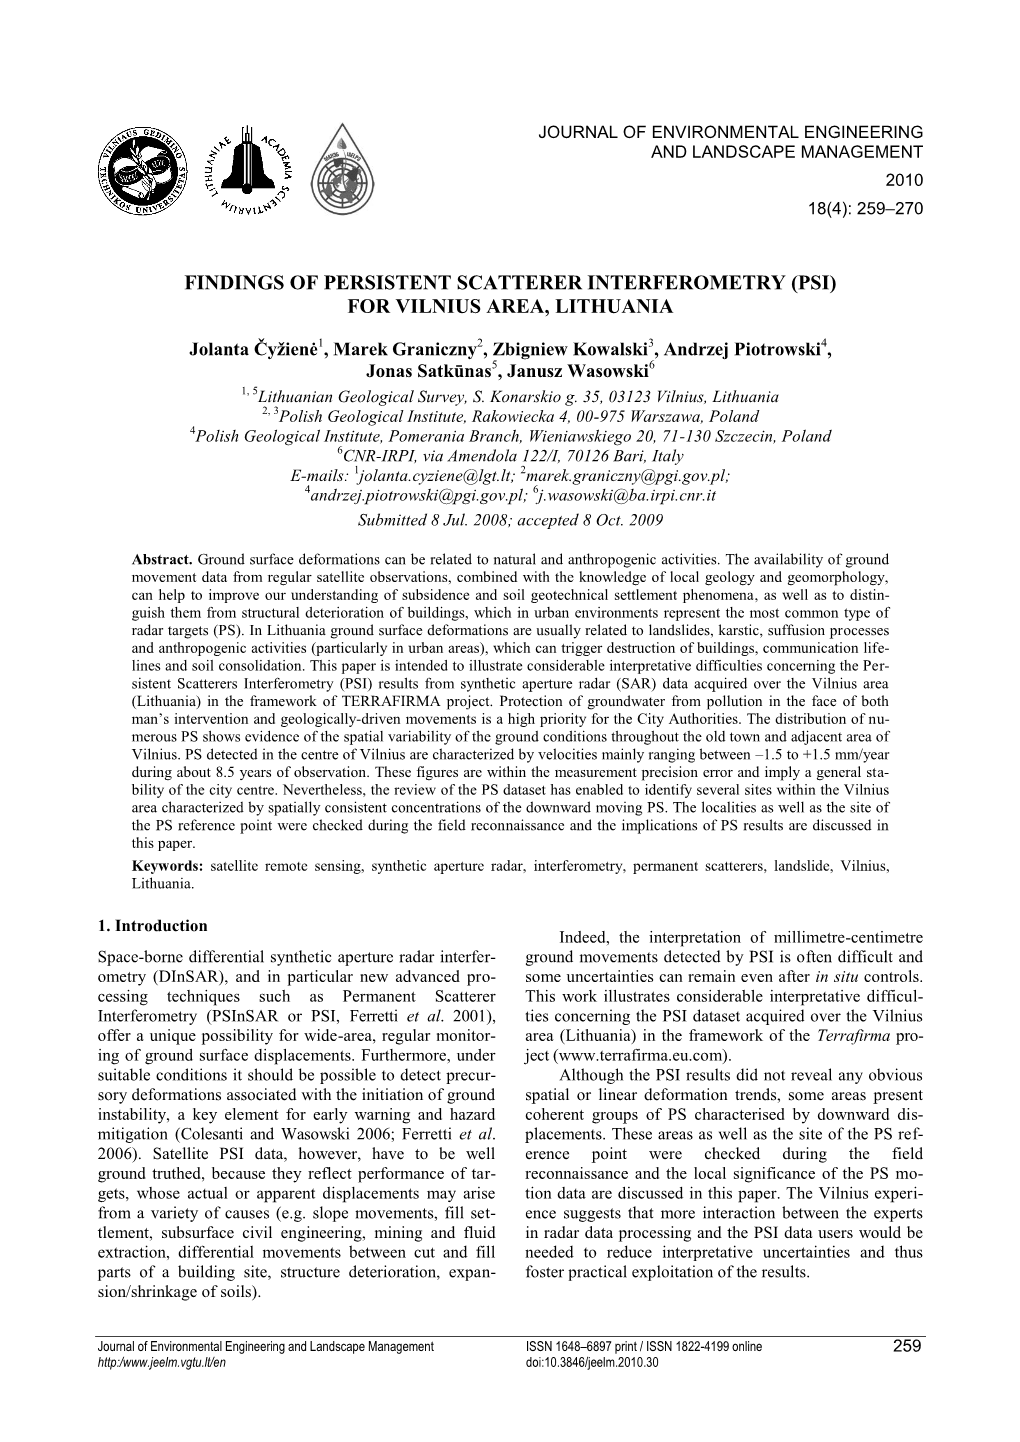 Findings of Persistent Scatterer Interferometry (Psi) for Vilnius Area, Lithuania